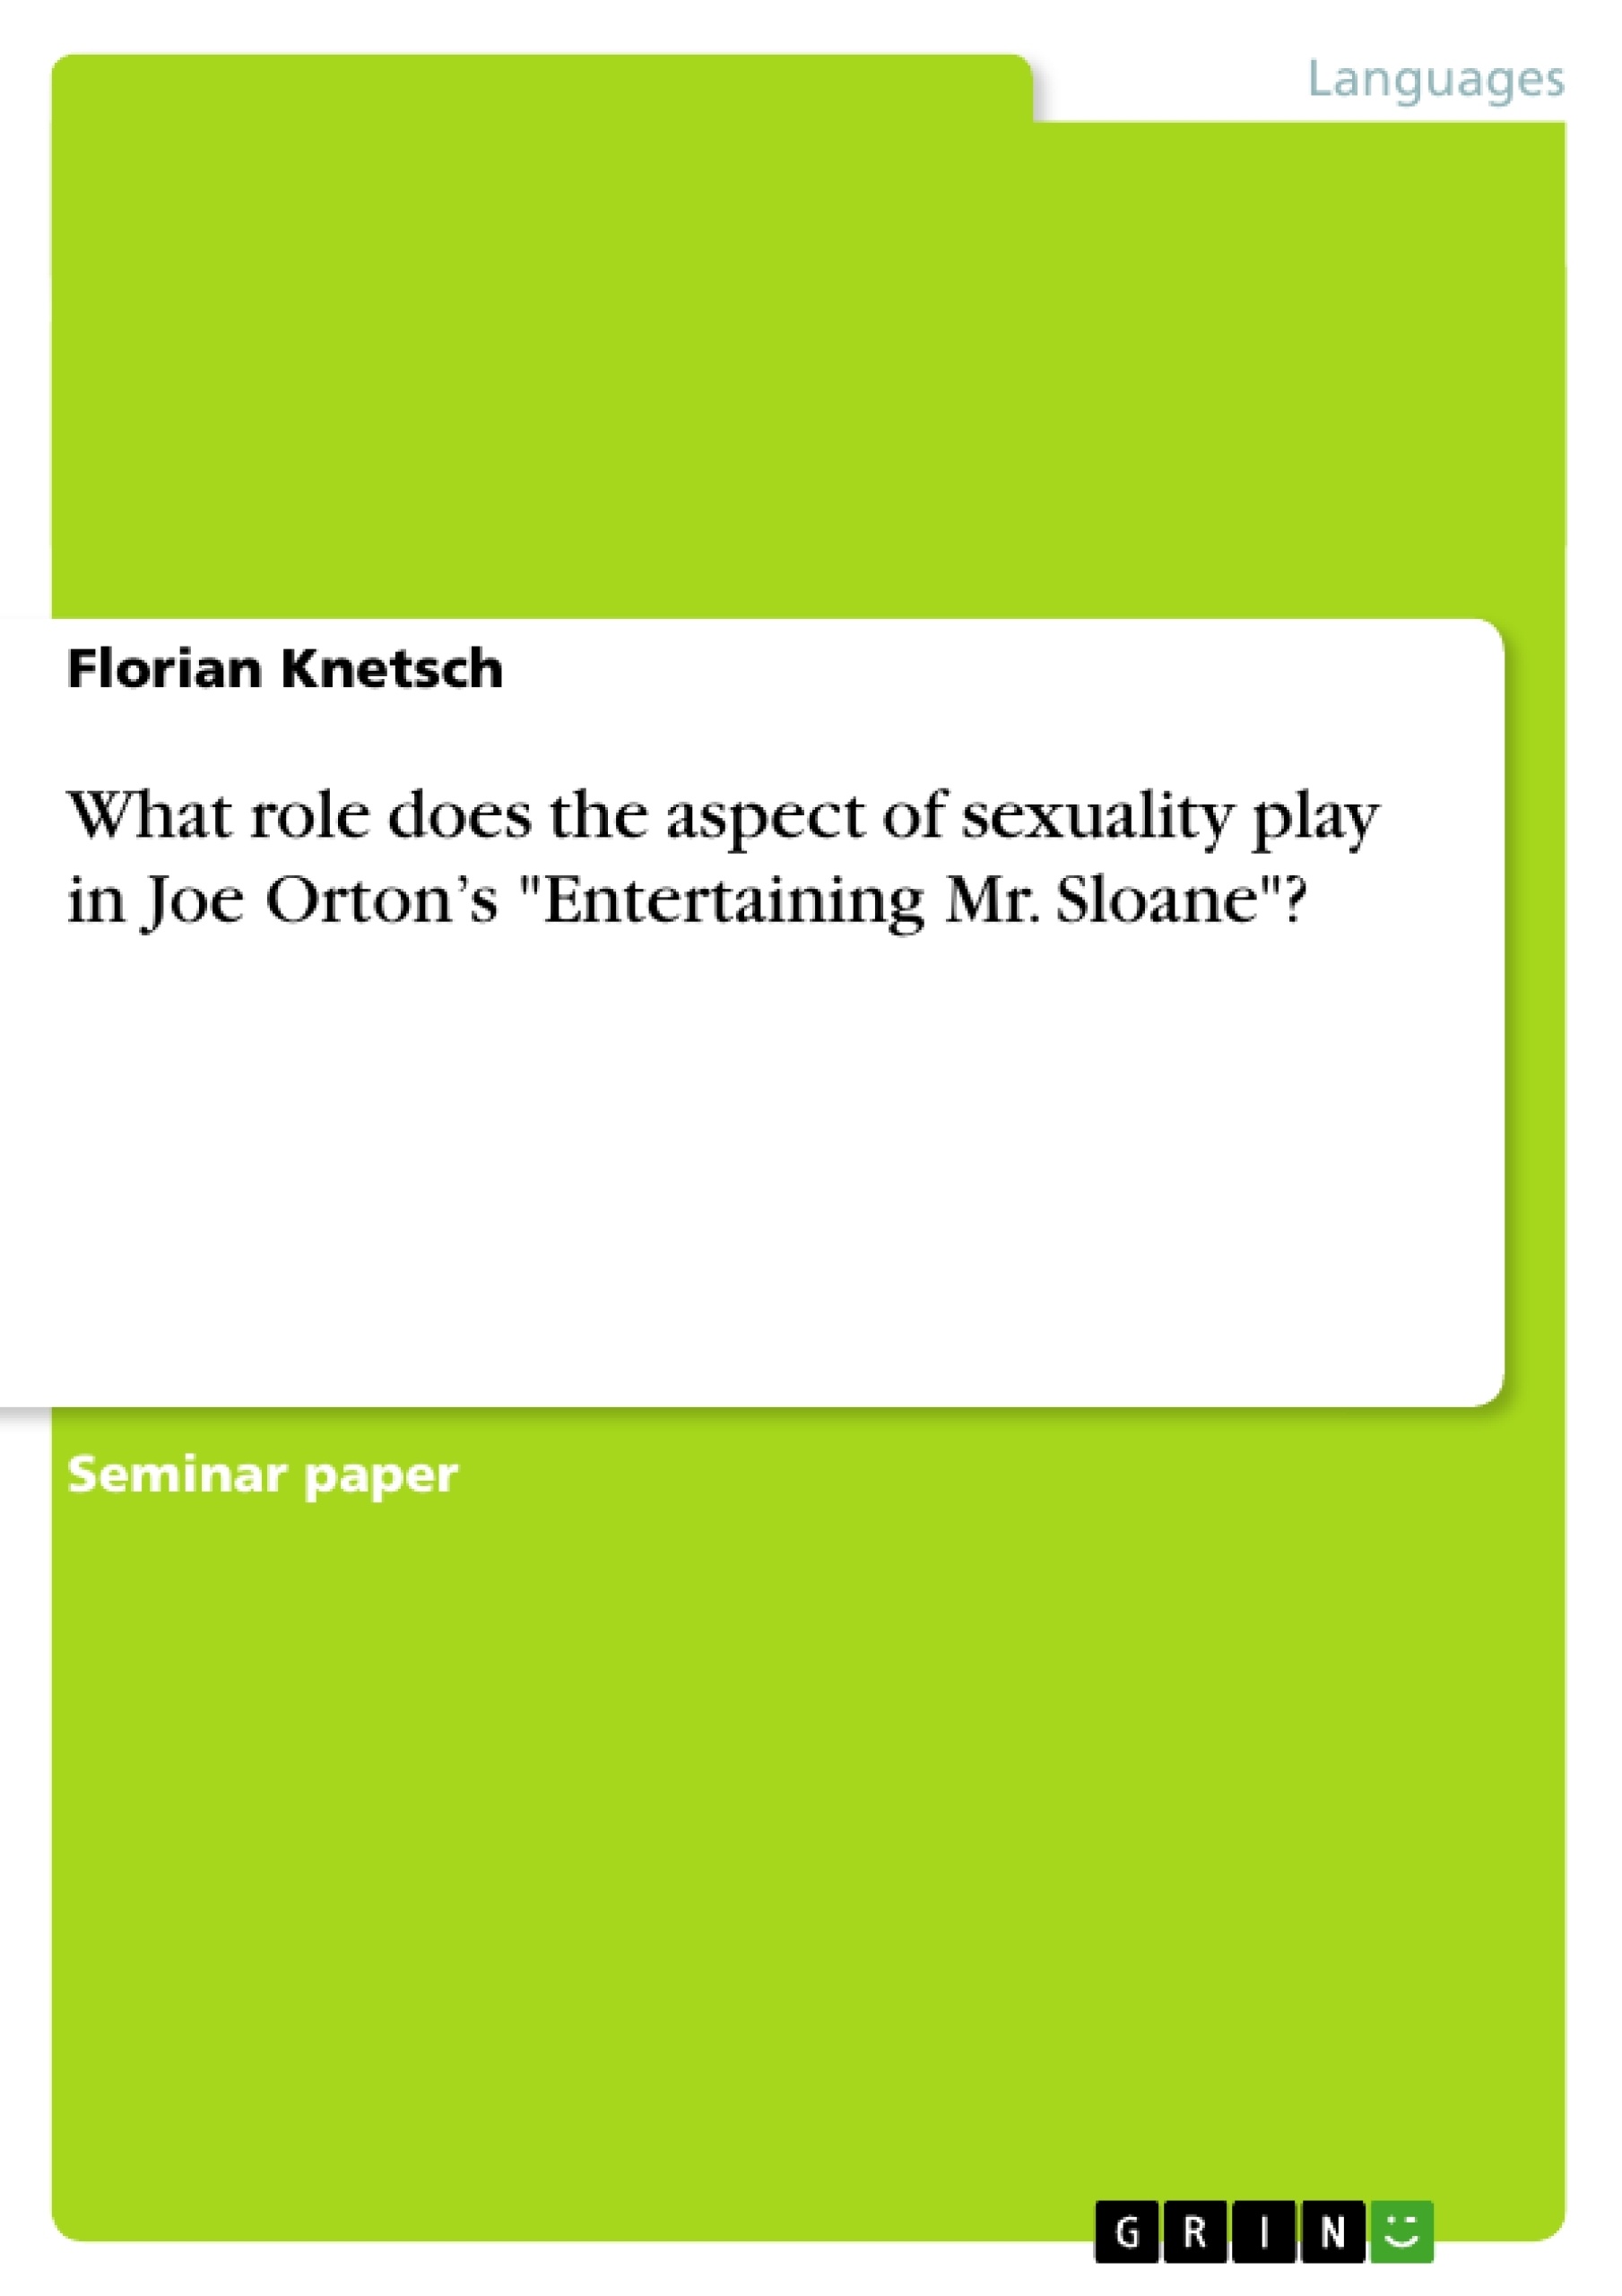 Título: What role does the aspect of sexuality play in Joe Orton’s "Entertaining Mr. Sloane"?